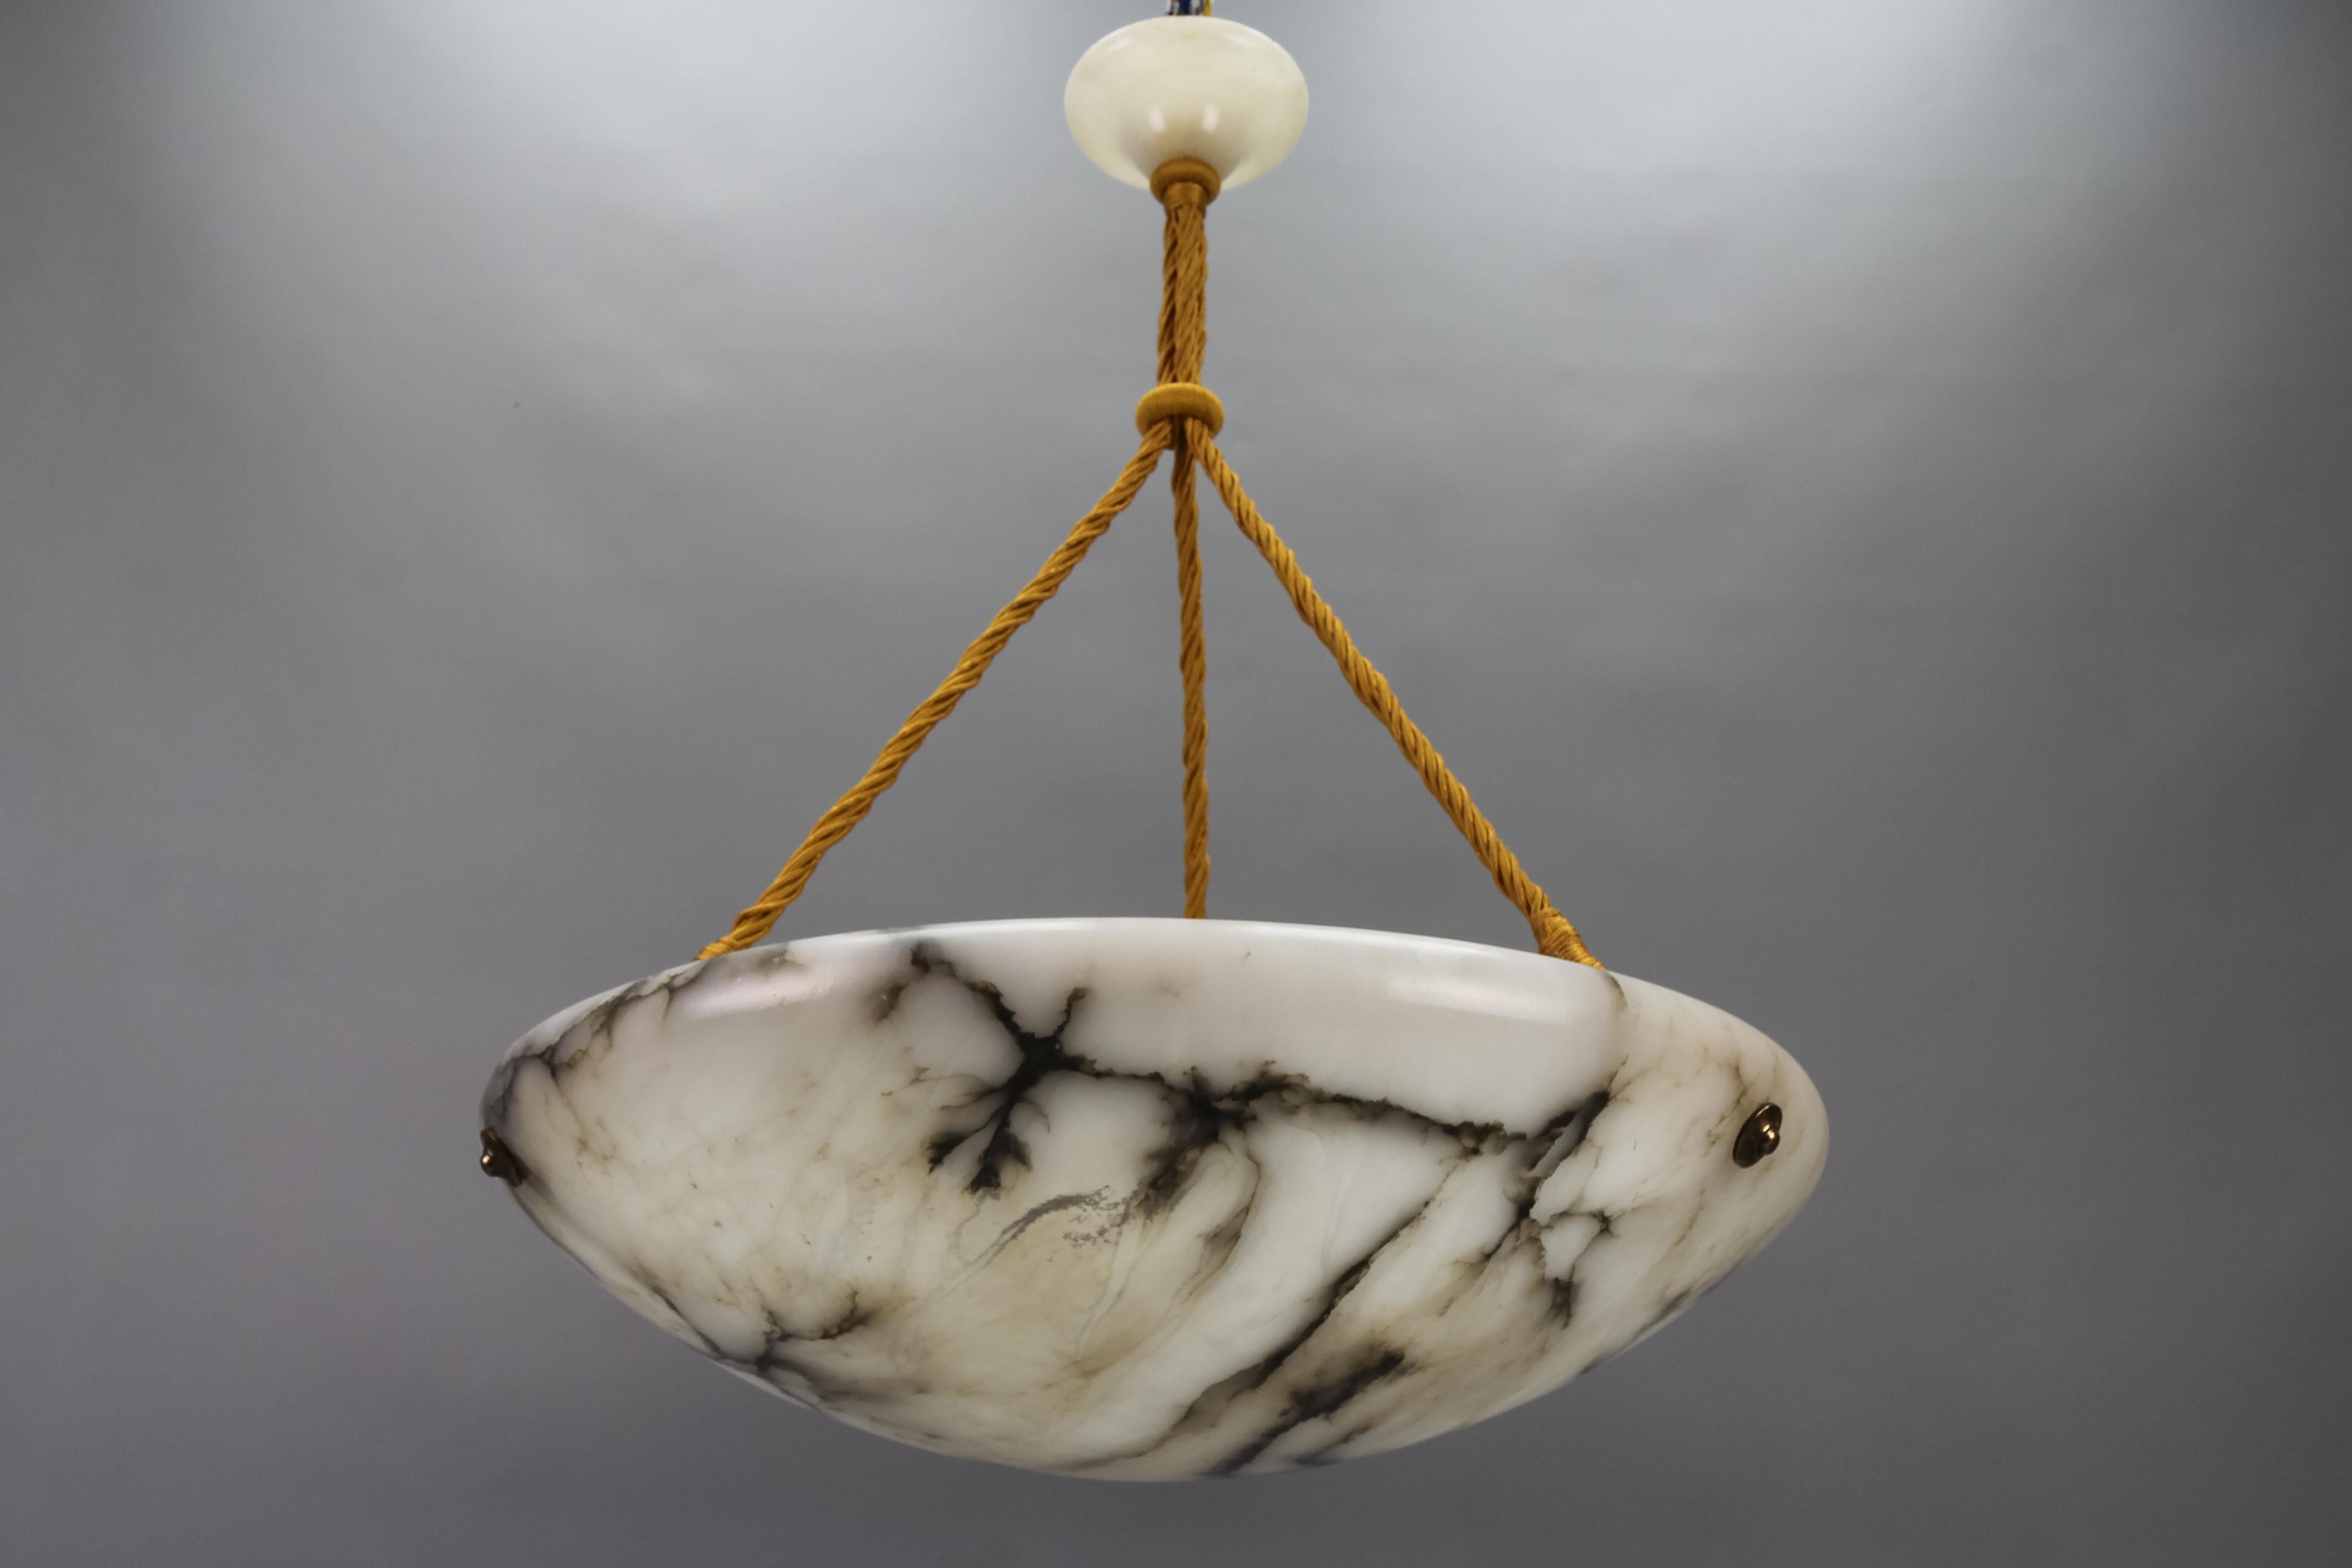 French Large Black Veined White and Grey Alabaster Pendant Light Fixture, 1920